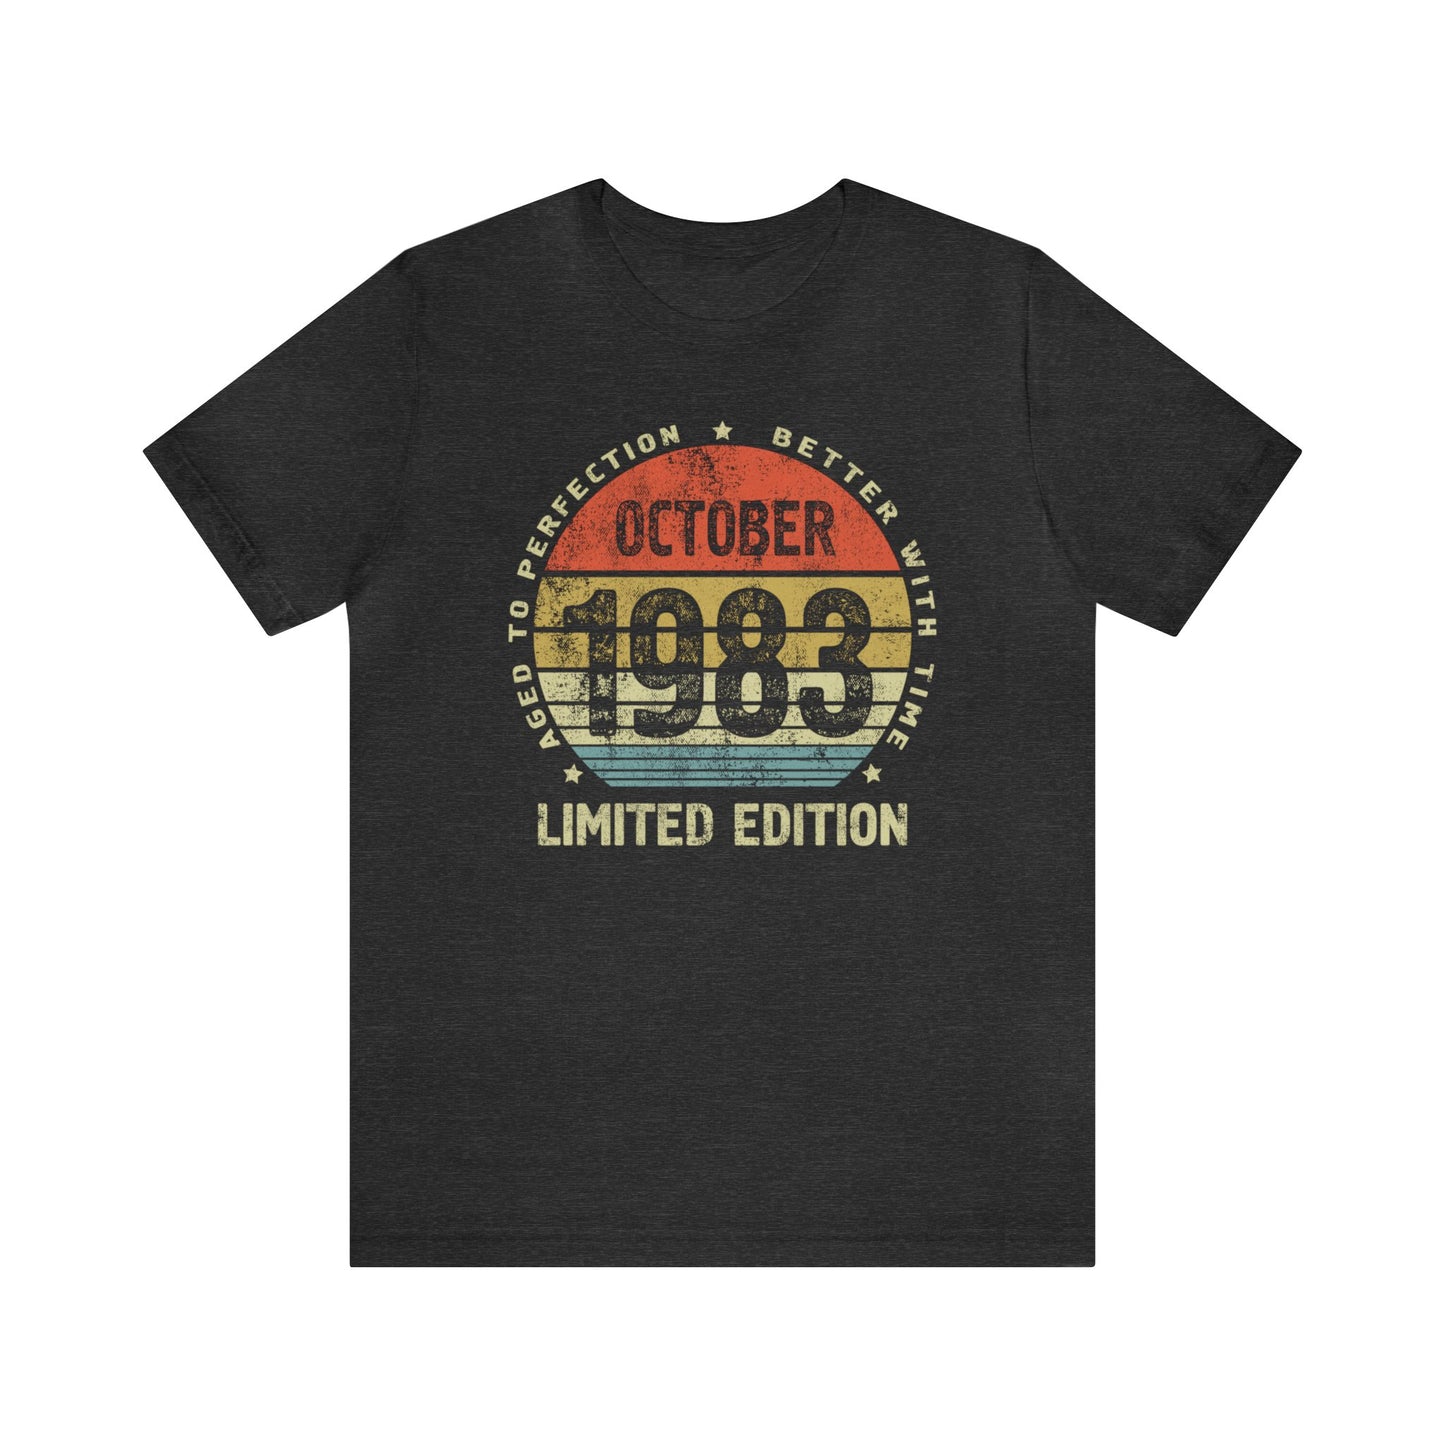 40th birthday gift for women or men October 1983 birthday shirt for sister or brother